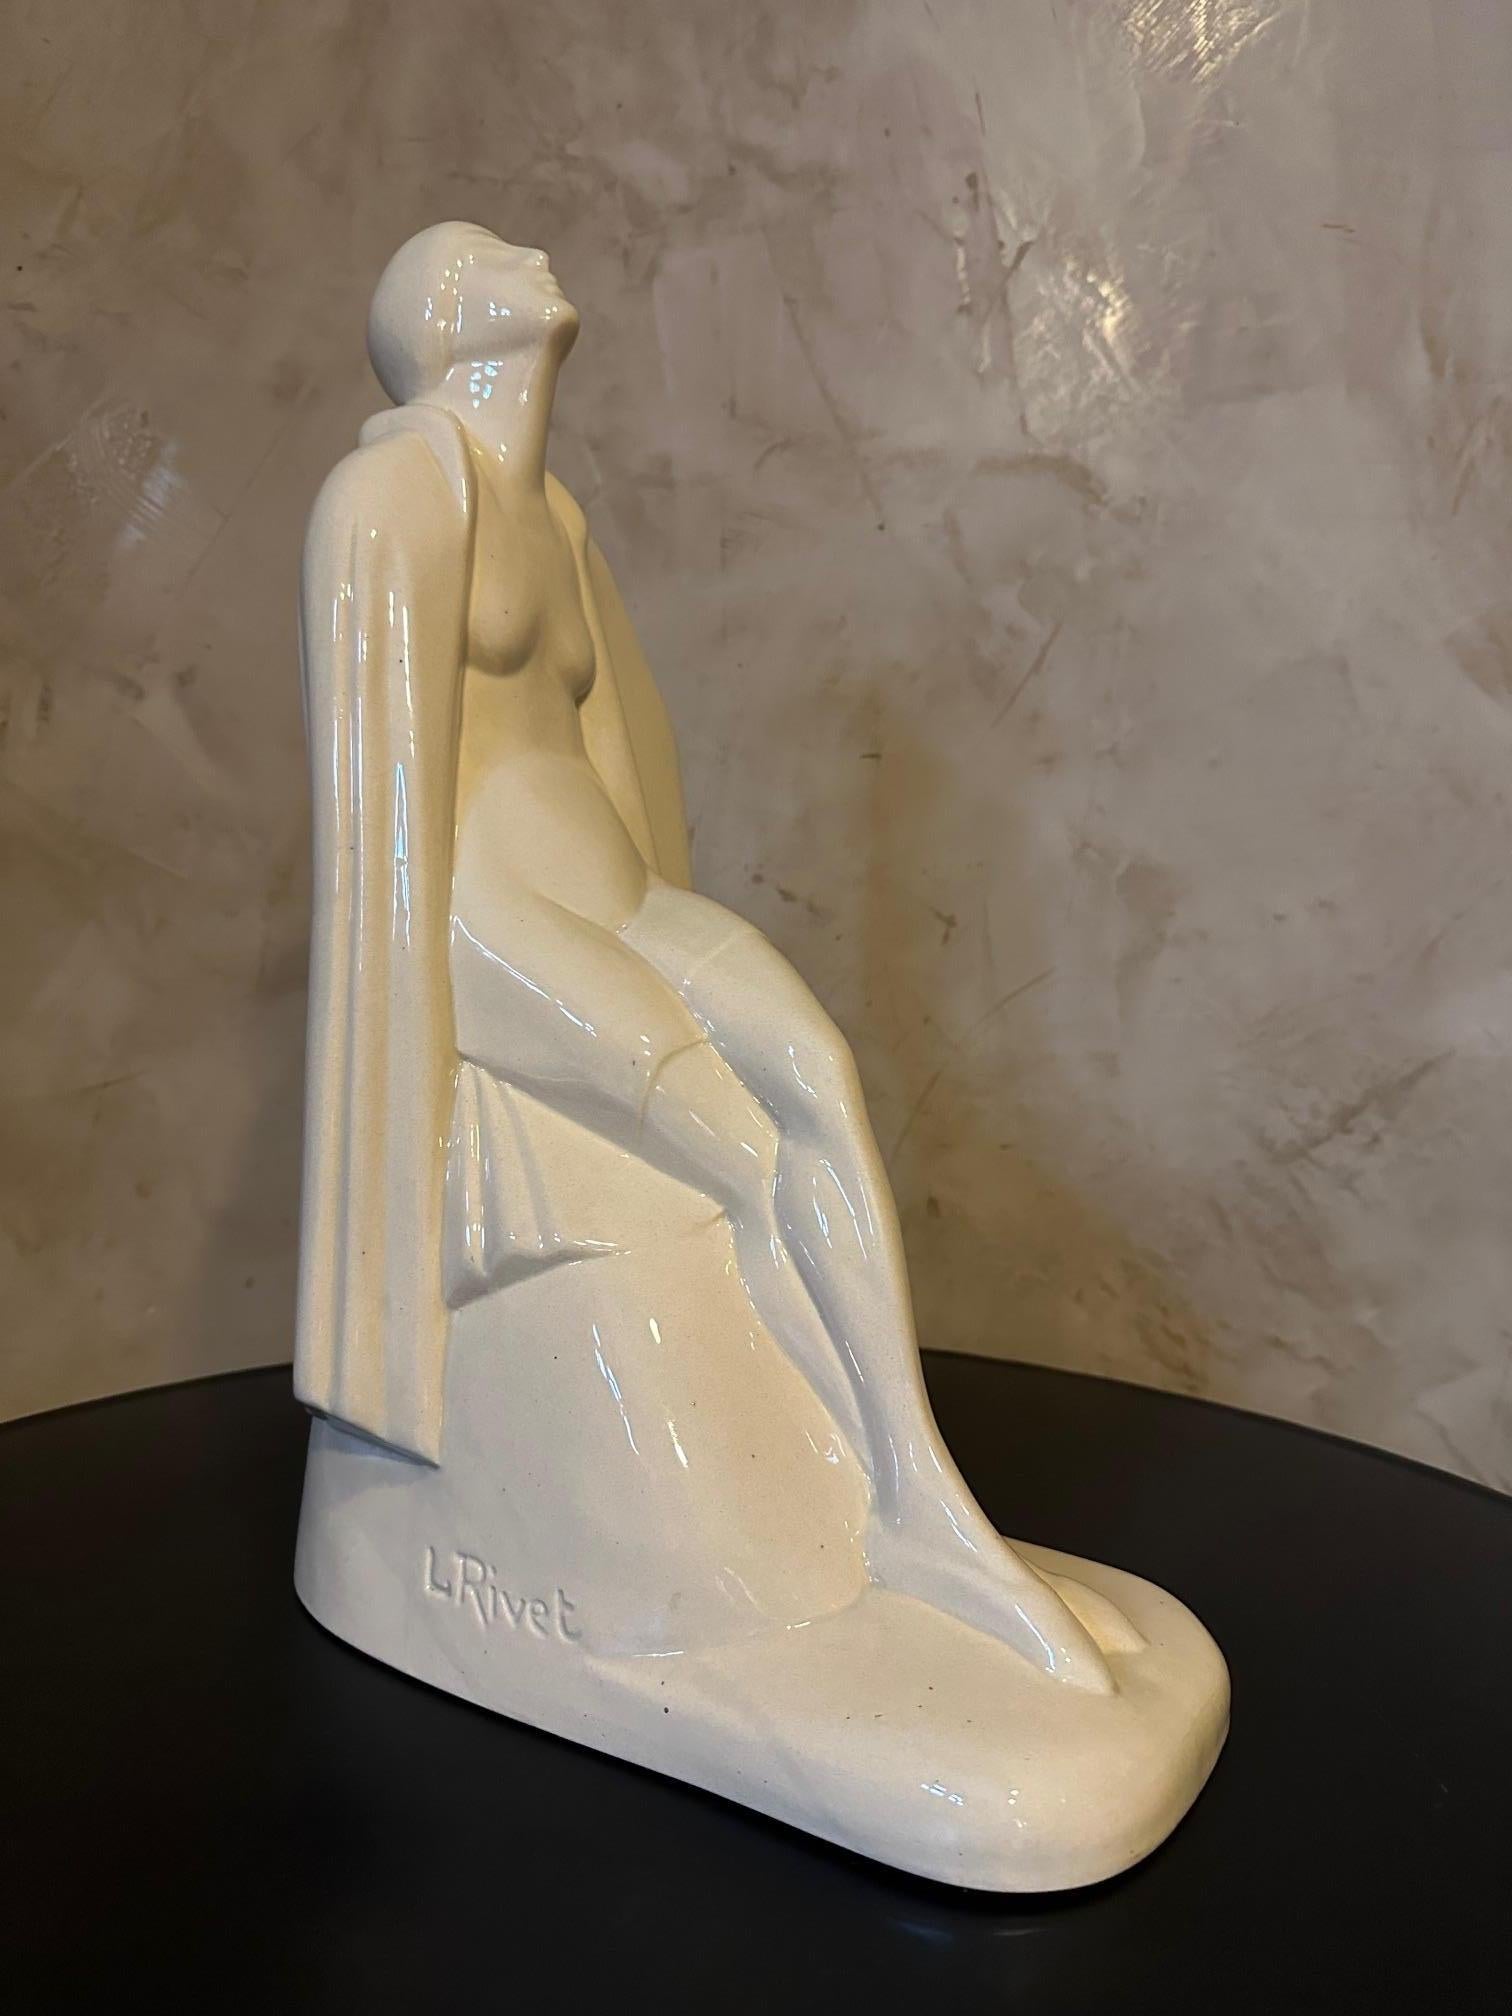 Very beautiful art deco statue in cracked ceramic representing a woman coming out of the bath. Signed Louis Rivet on the base. 
Very good quality and large size. For art deco lovers.
​